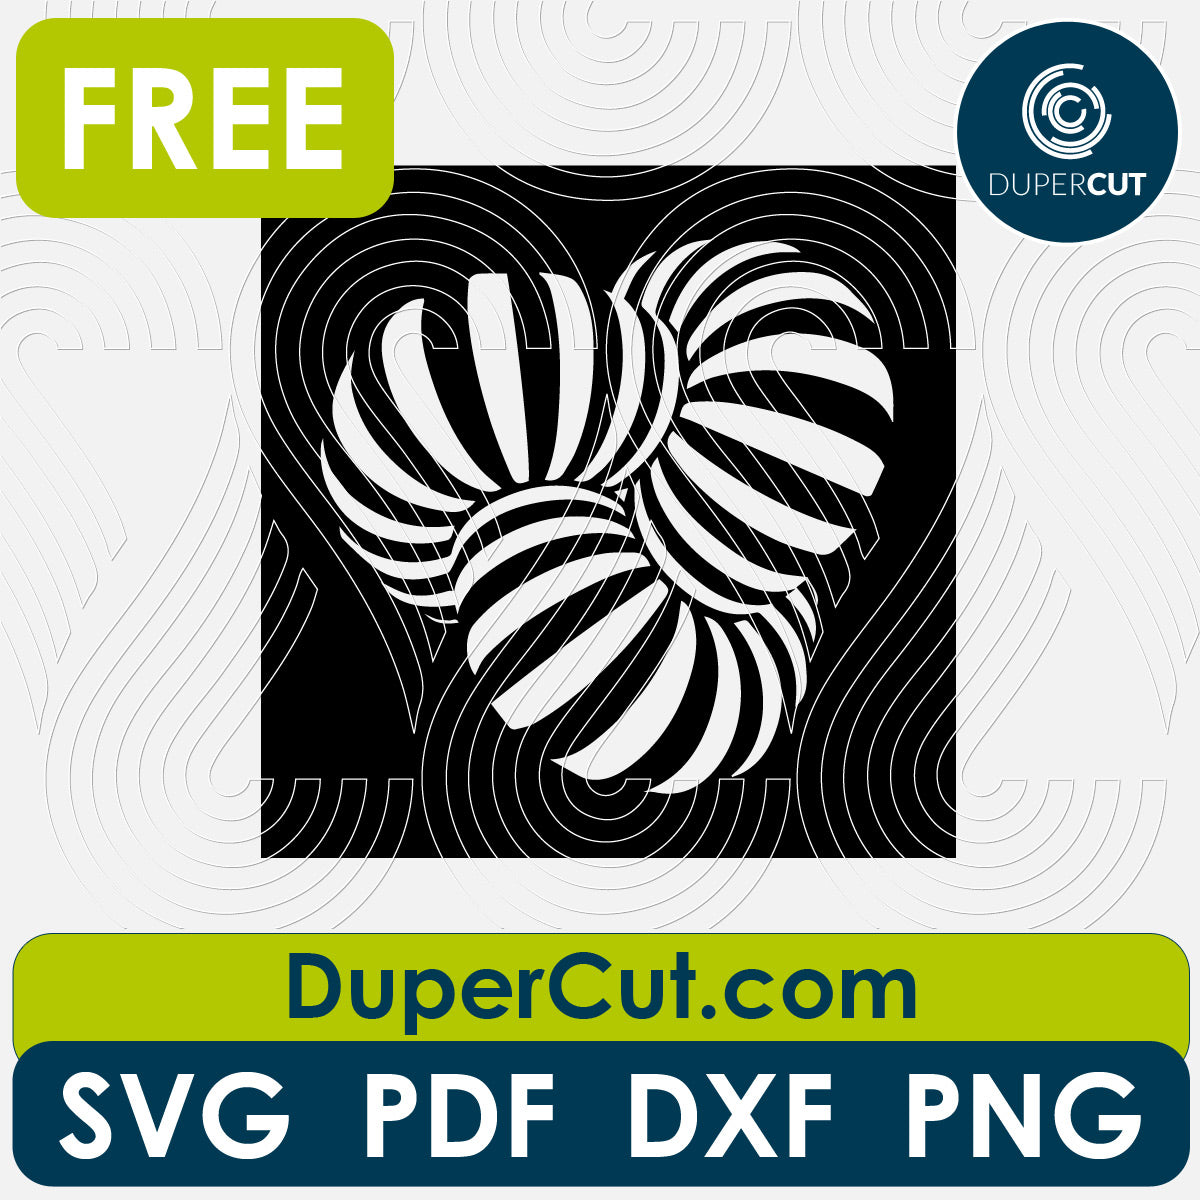 Optical illusion hypnose pattern - free SVG PNG DXF vector files for laser and blade cutting machines. Glowforge, Cricut, Silhouette cameo templates by DuperCut.com